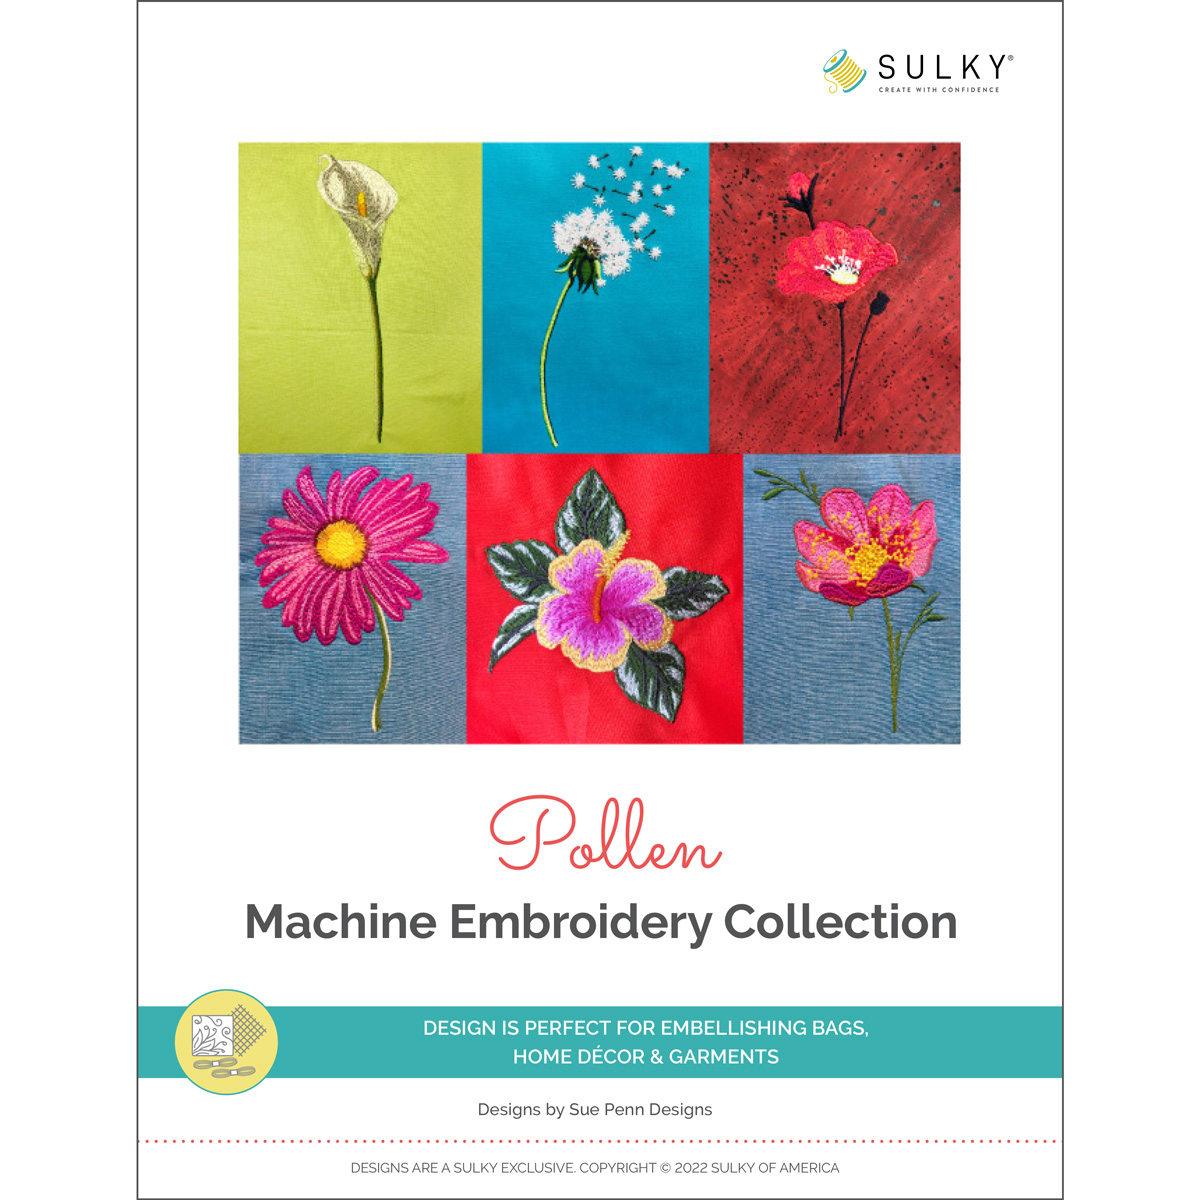 Pollen Machine Embroidery Collection Questions & Answers